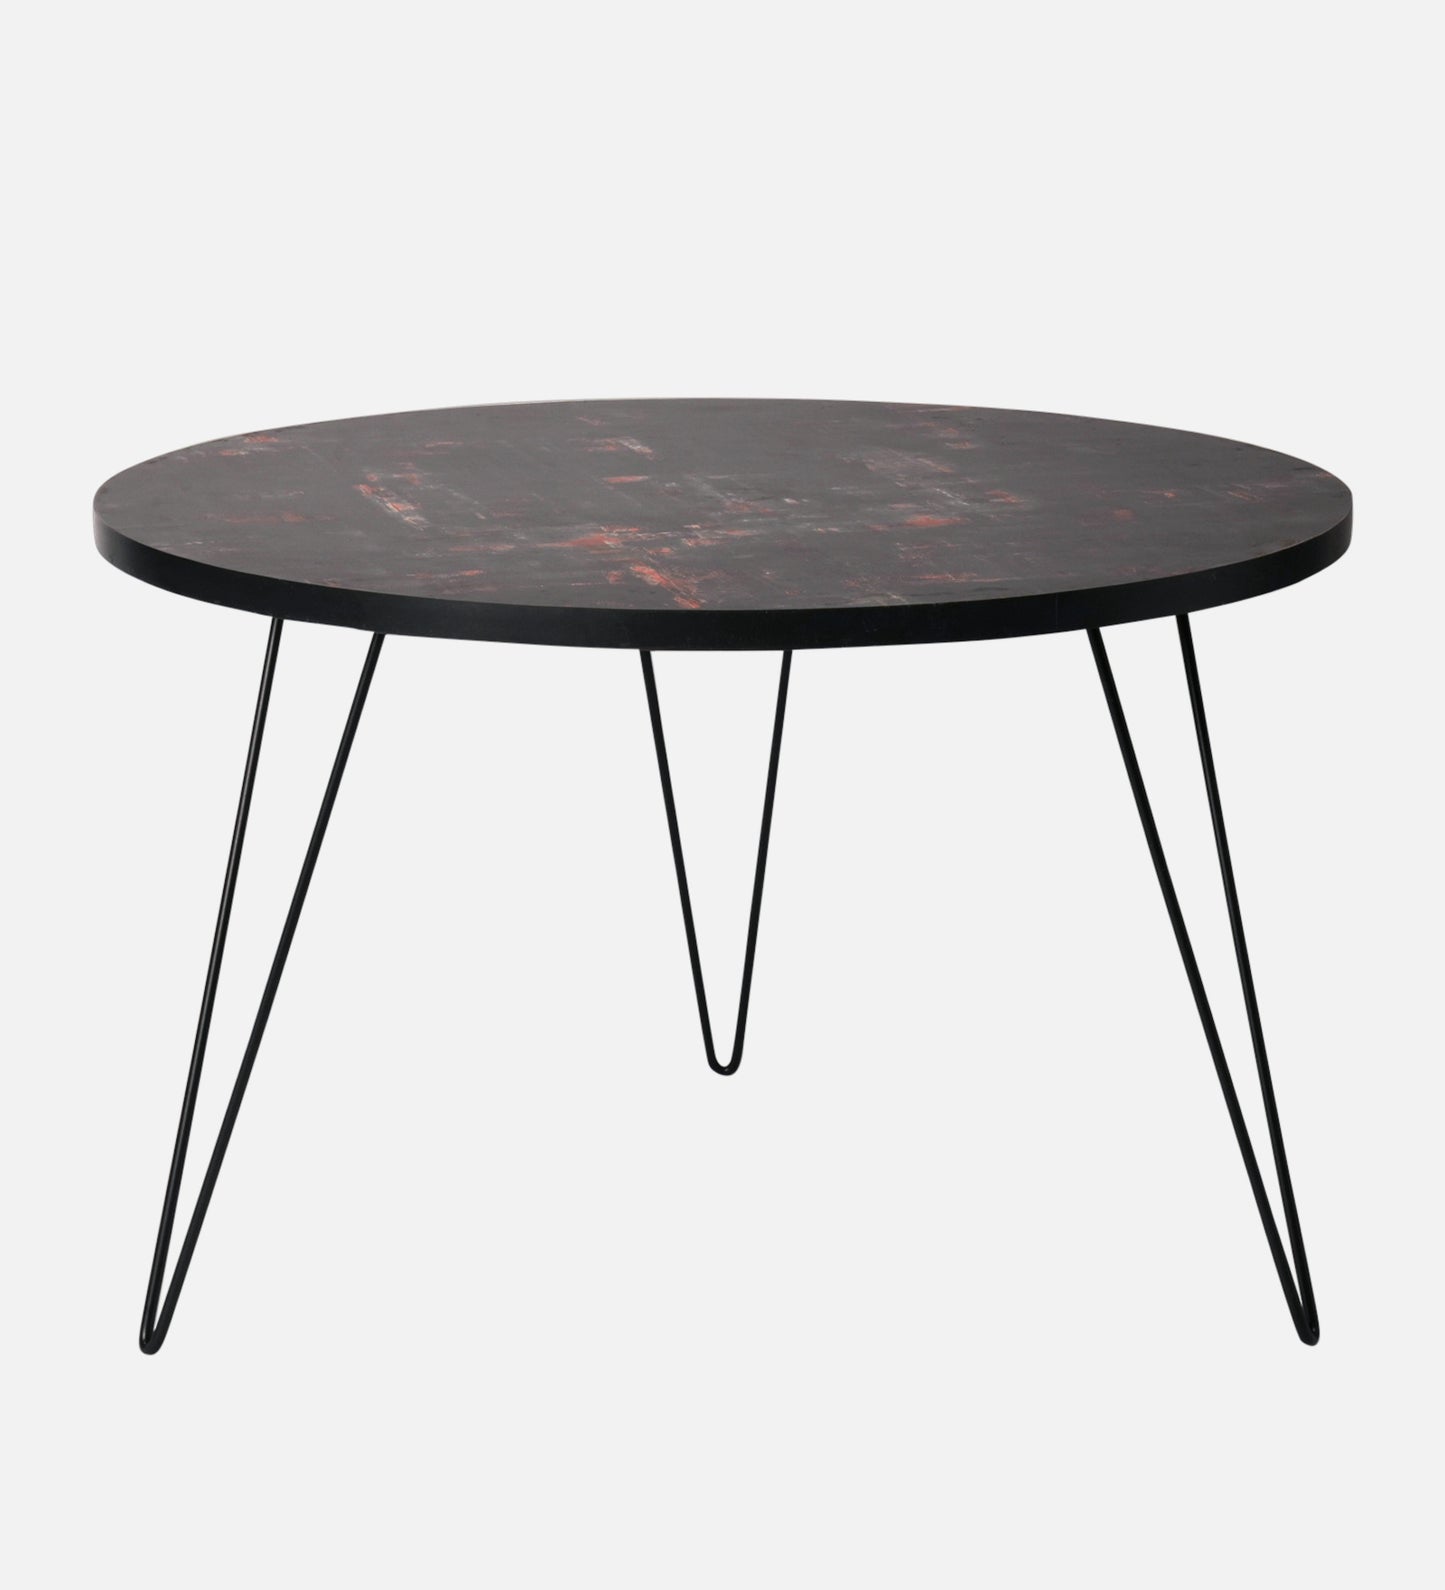 Dusk Round Coffee Tables, Wooden Tables, Coffee Tables, Center Tables, Living Room Decor by A Tiny Mistake